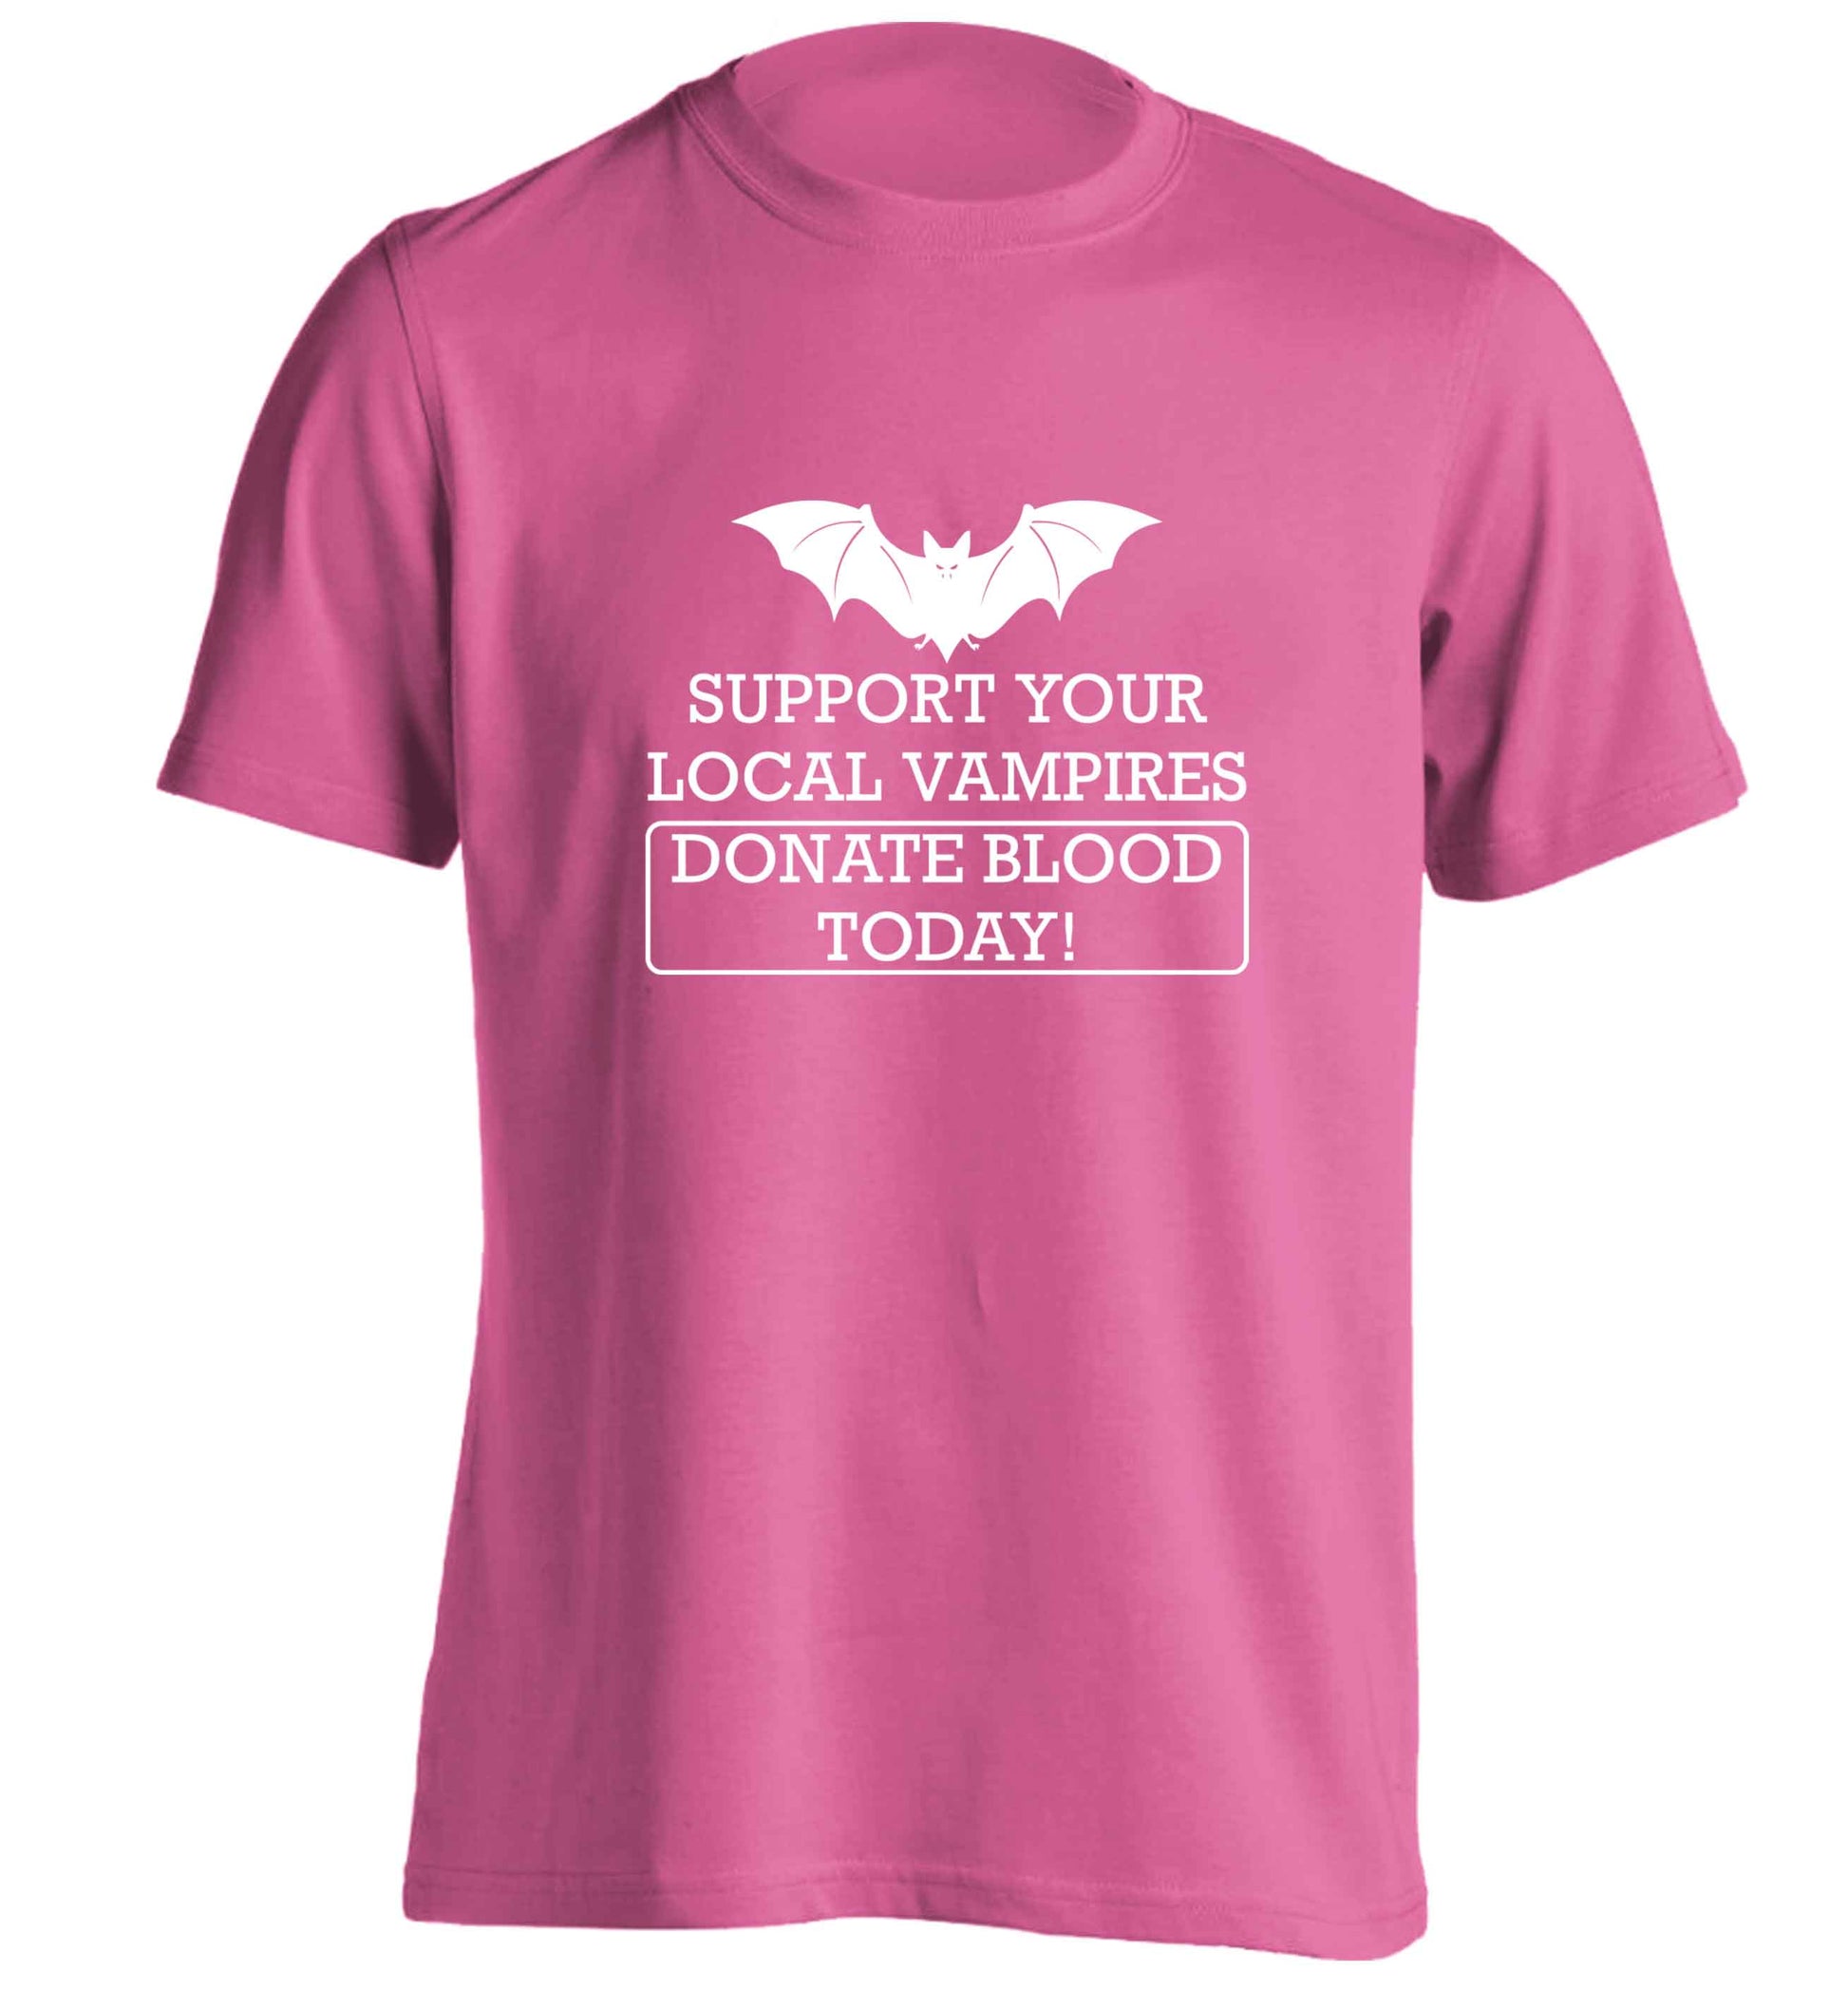 Support your local vampires donate blood today! adults unisex pink Tshirt 2XL